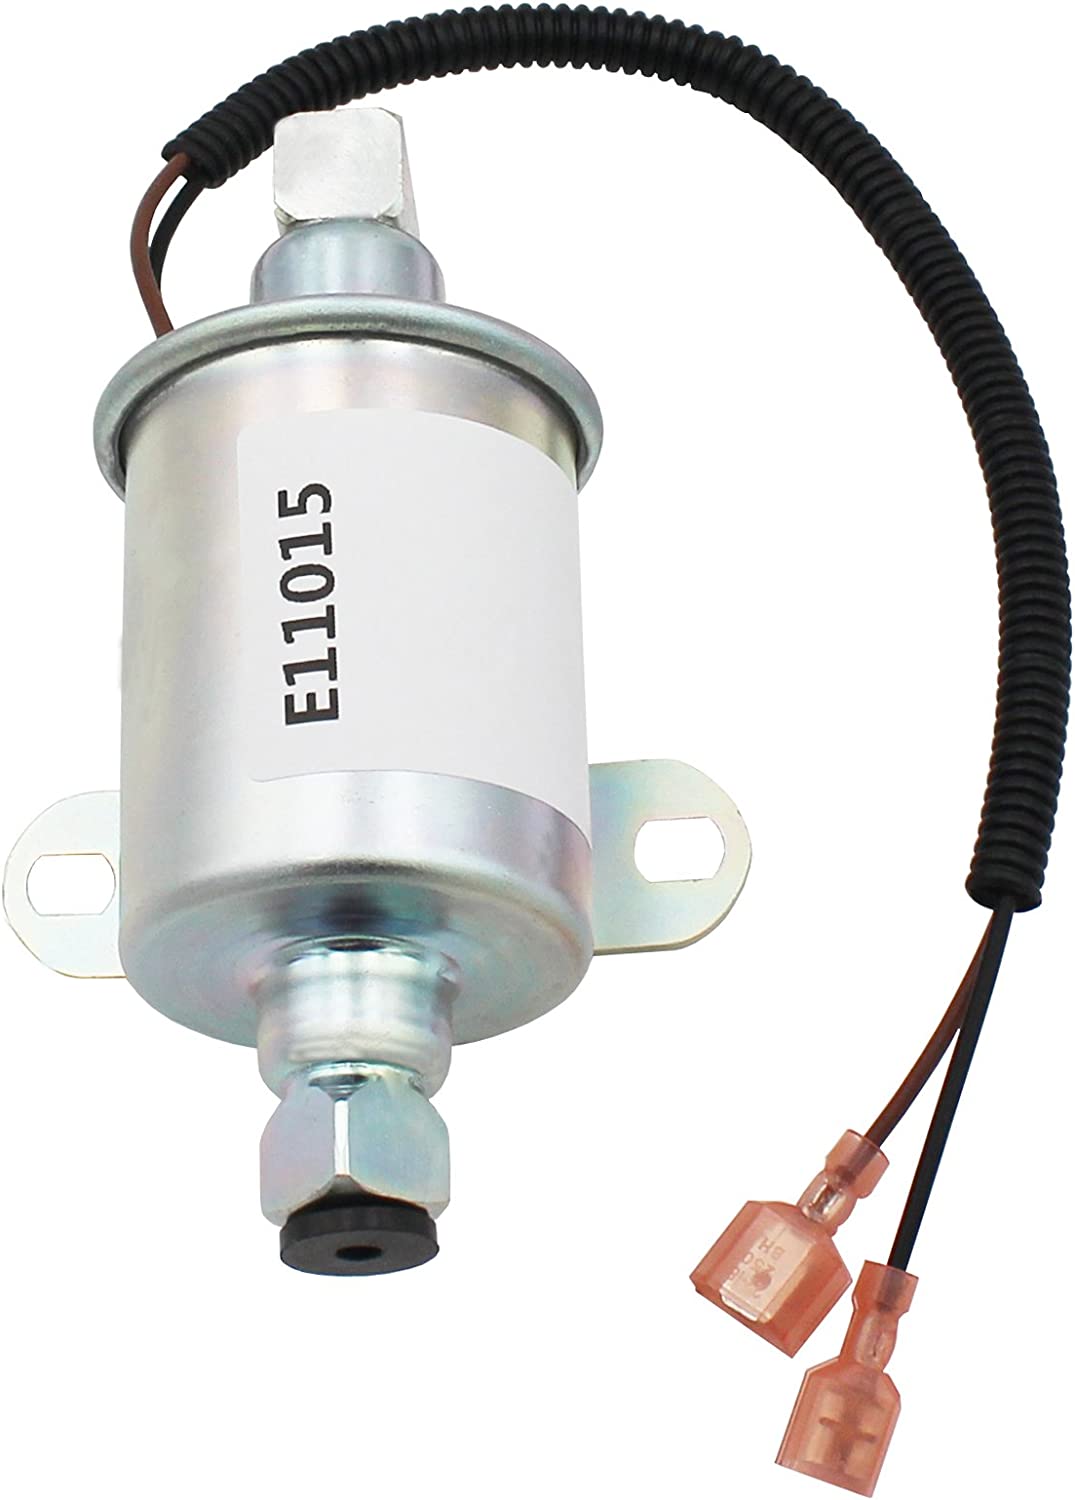 Electric Fuel Pump E11015 Replacement for Onan 5500 5.5KW Gas Generator